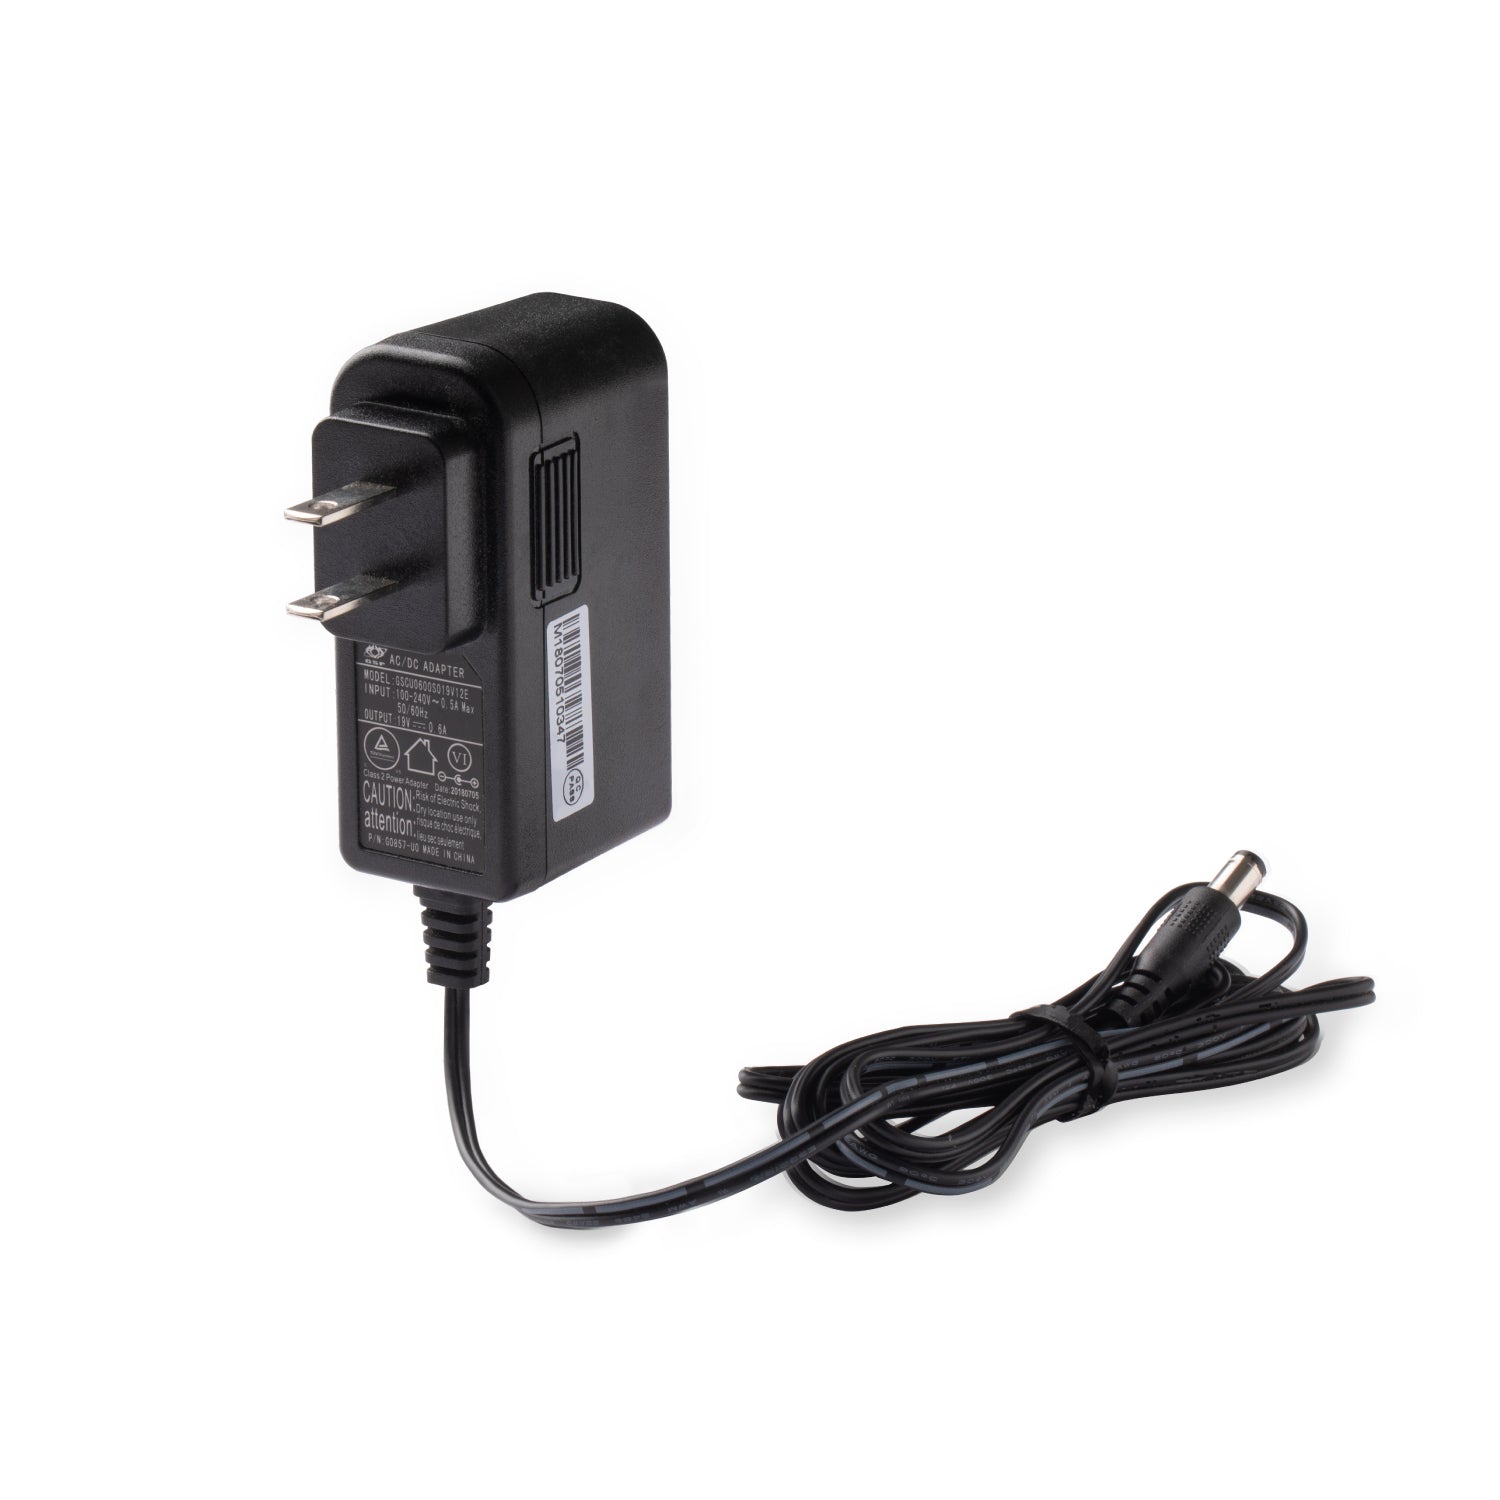 Power adapter, Compatible with RoboVac 11S, 11S PLUS, 11S MAX, 12, 15C, 15C MAX